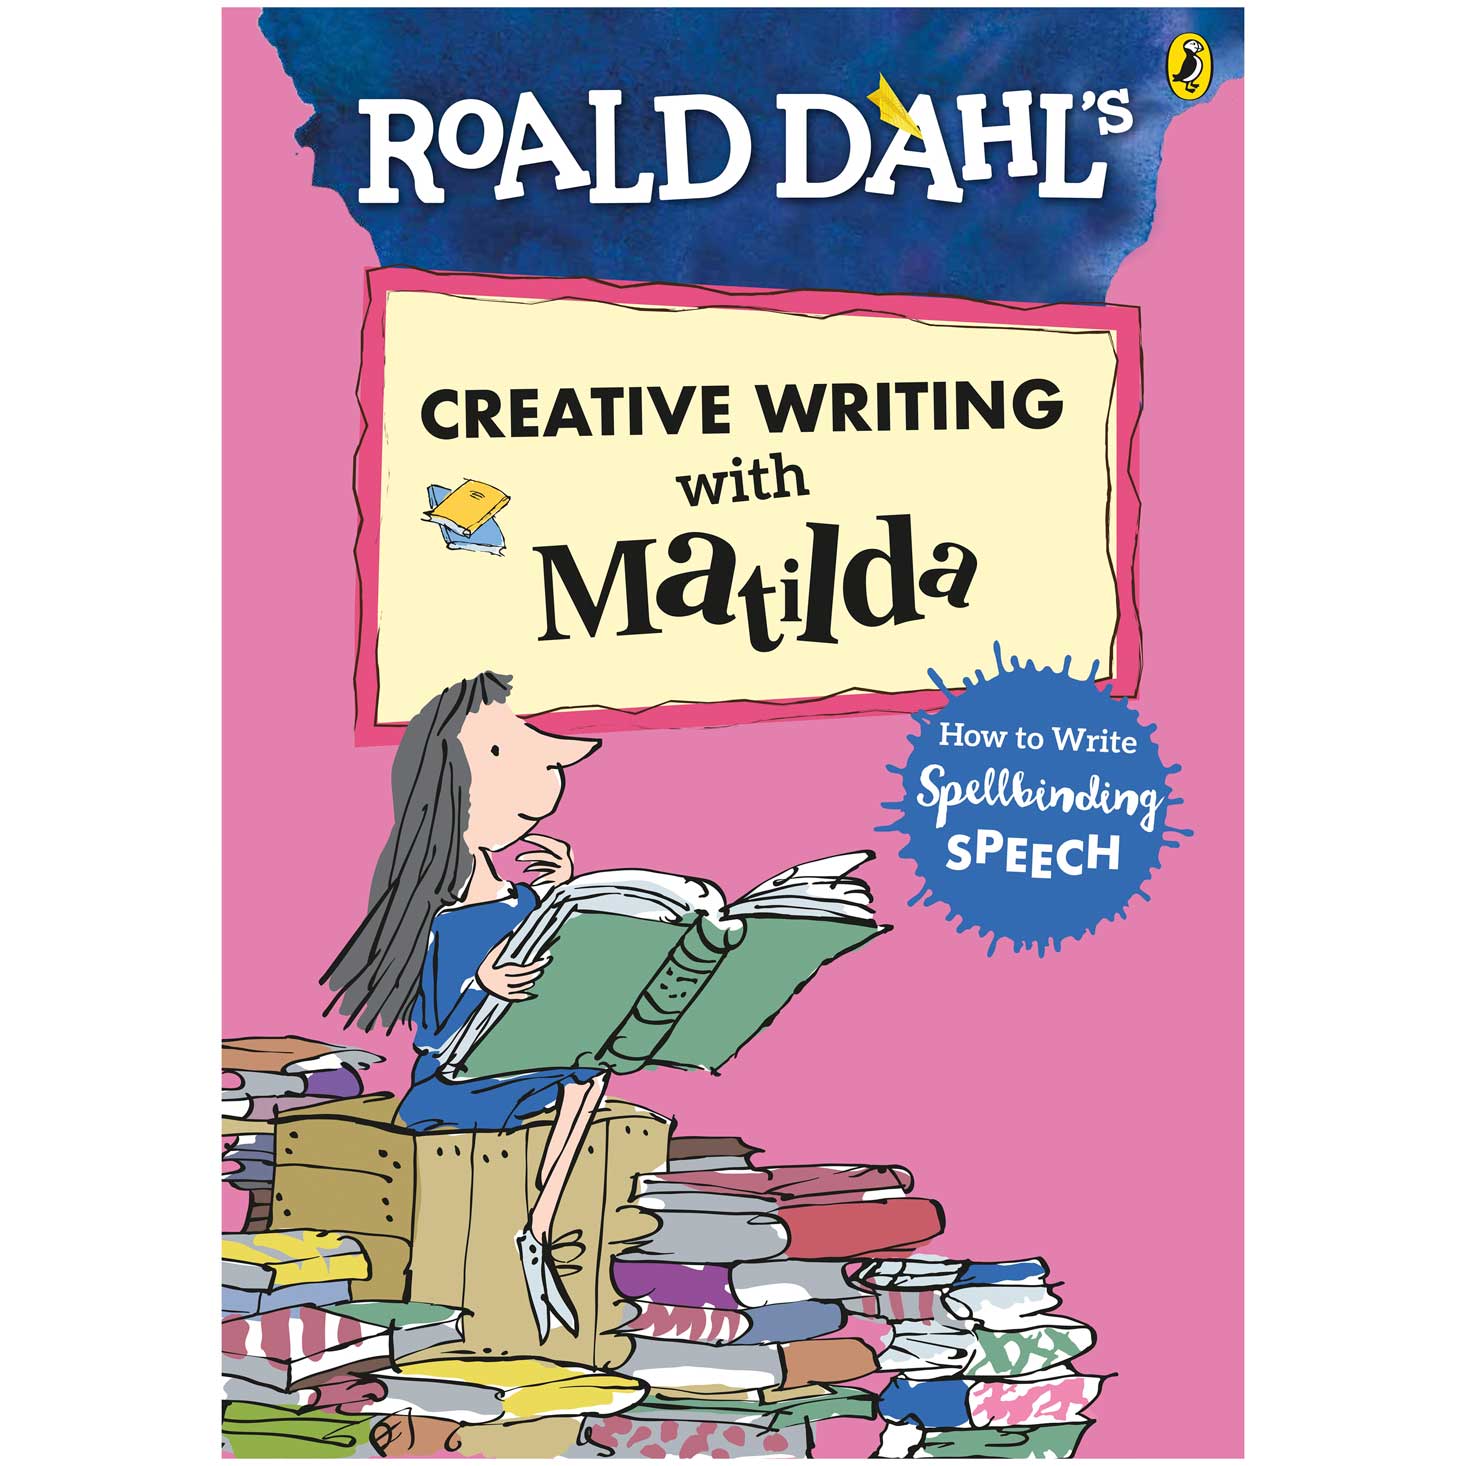 Creative Writing with Matilda based on Roald Dahl with illustrations by Quentin Blake